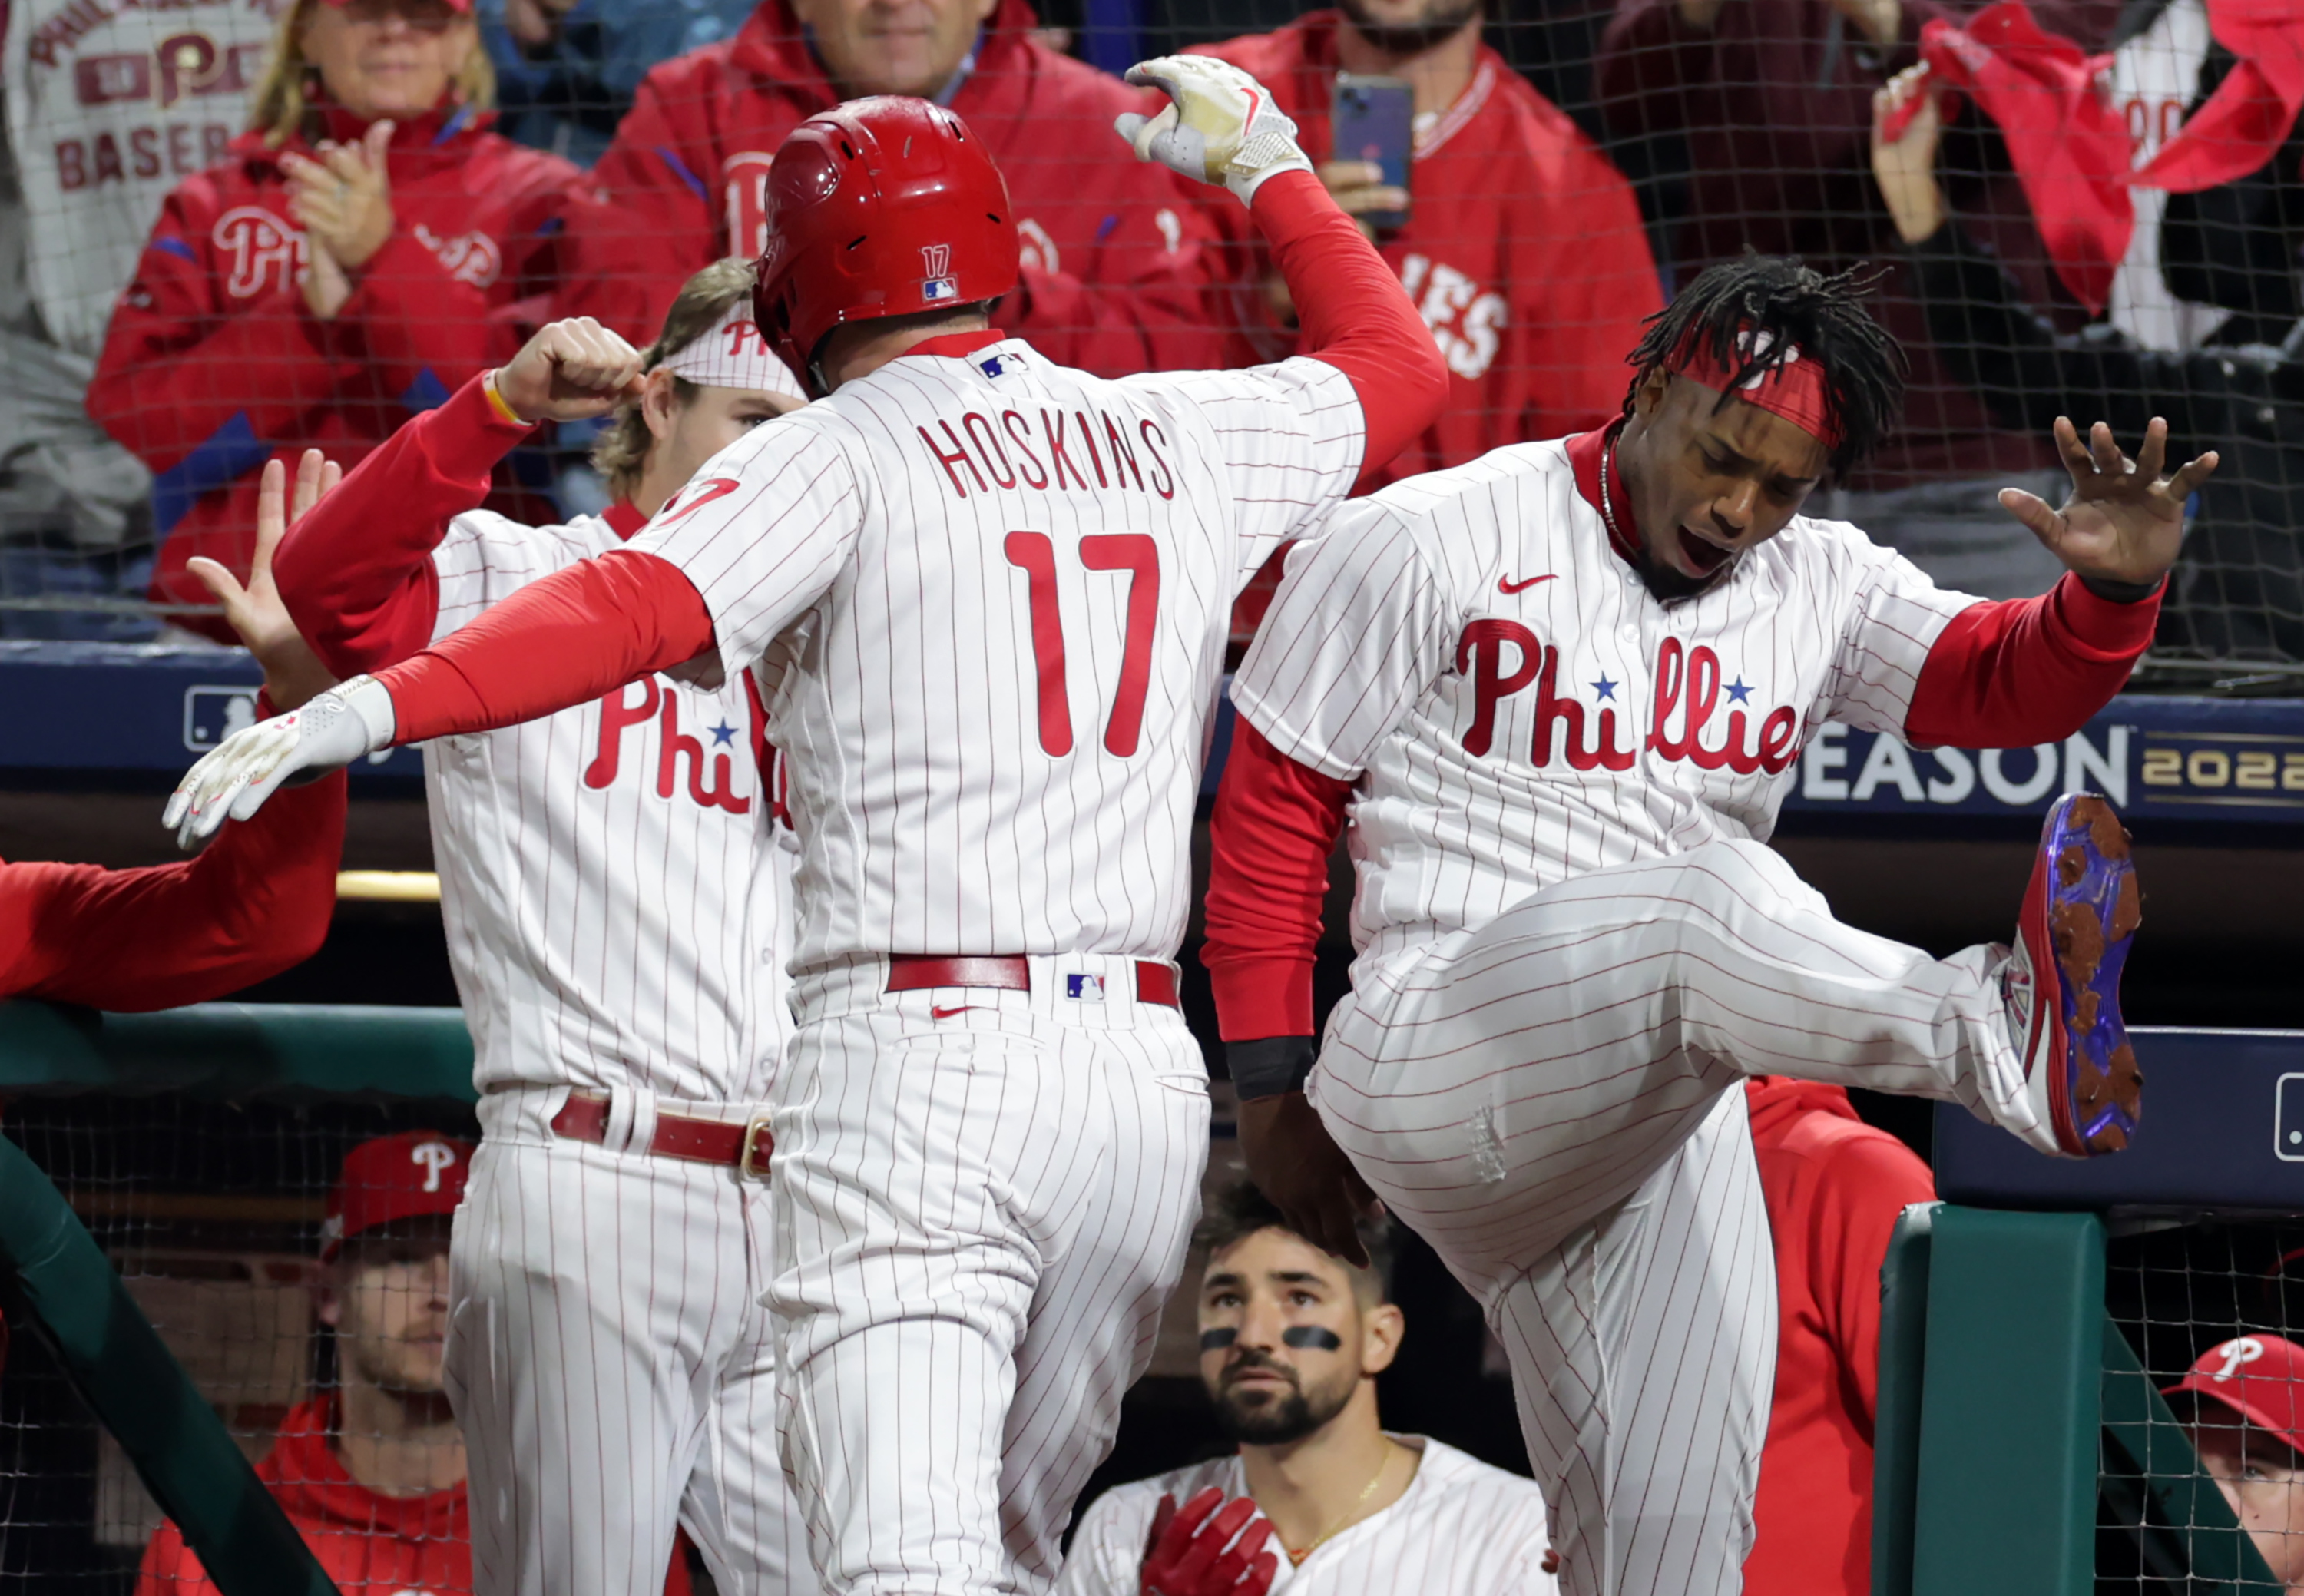 Police Preparing For Chaos After Phillies NLCS Game Saturday